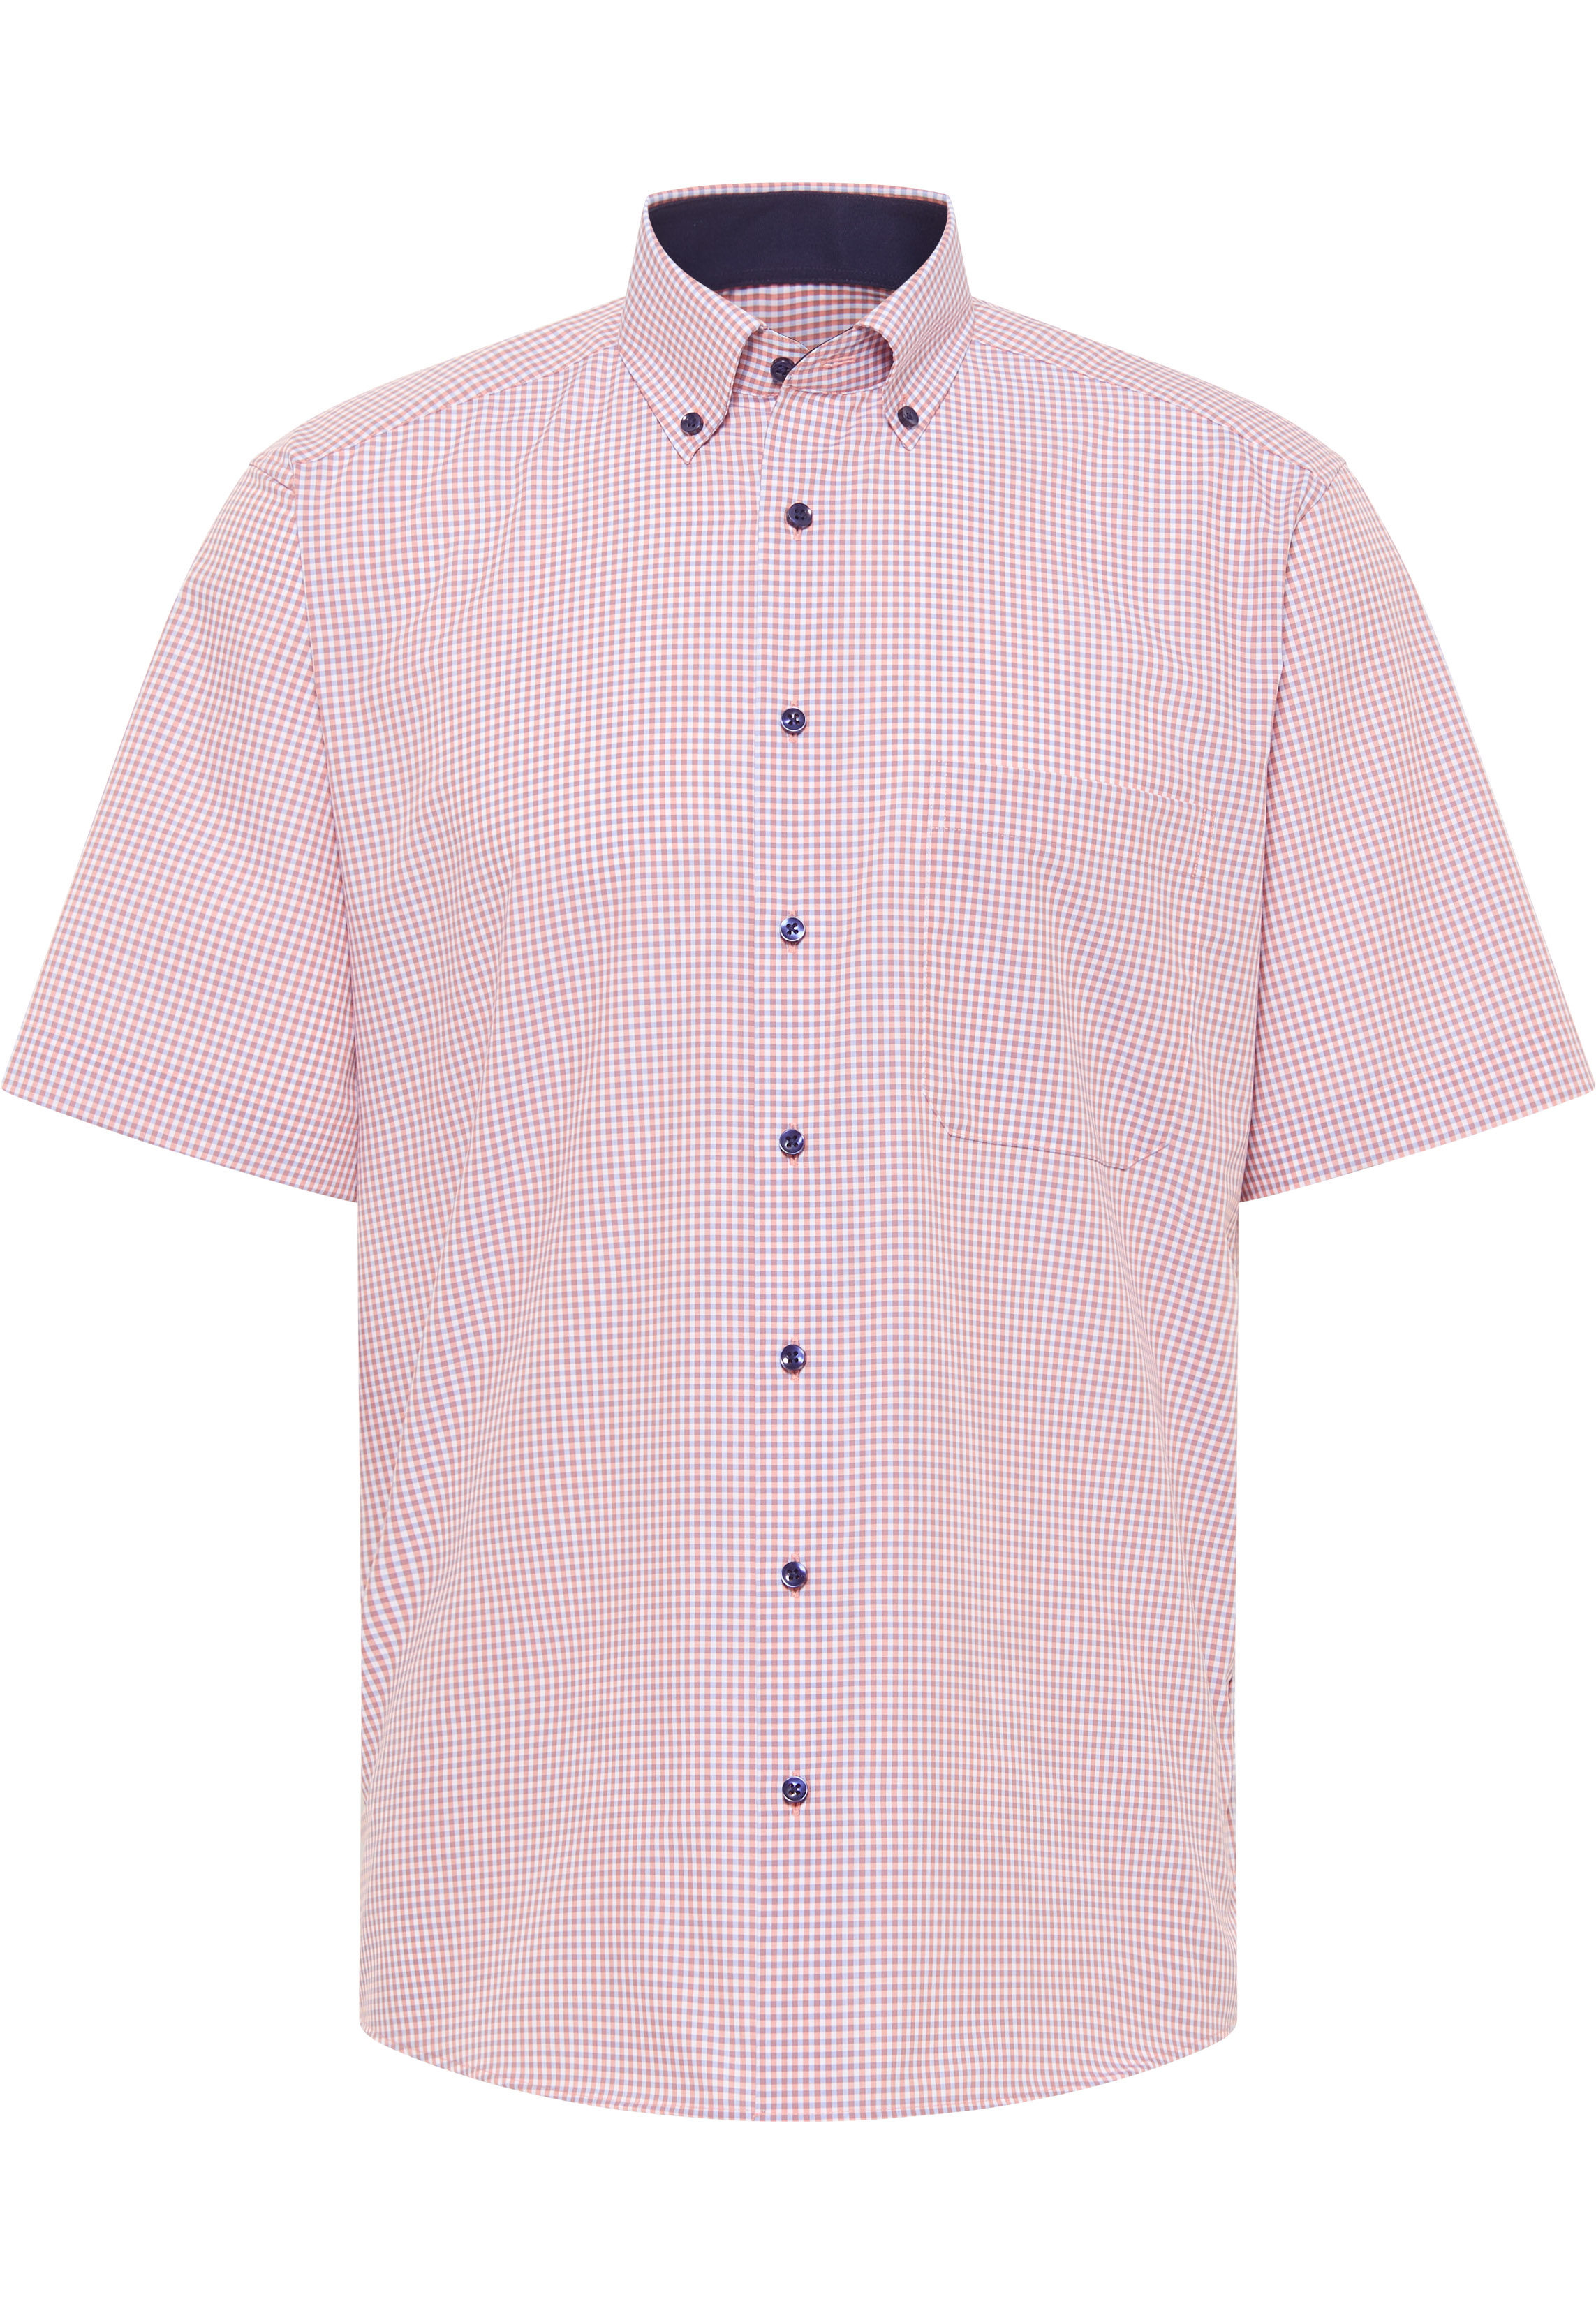 COMFORT FIT Shirt in apricot checkered